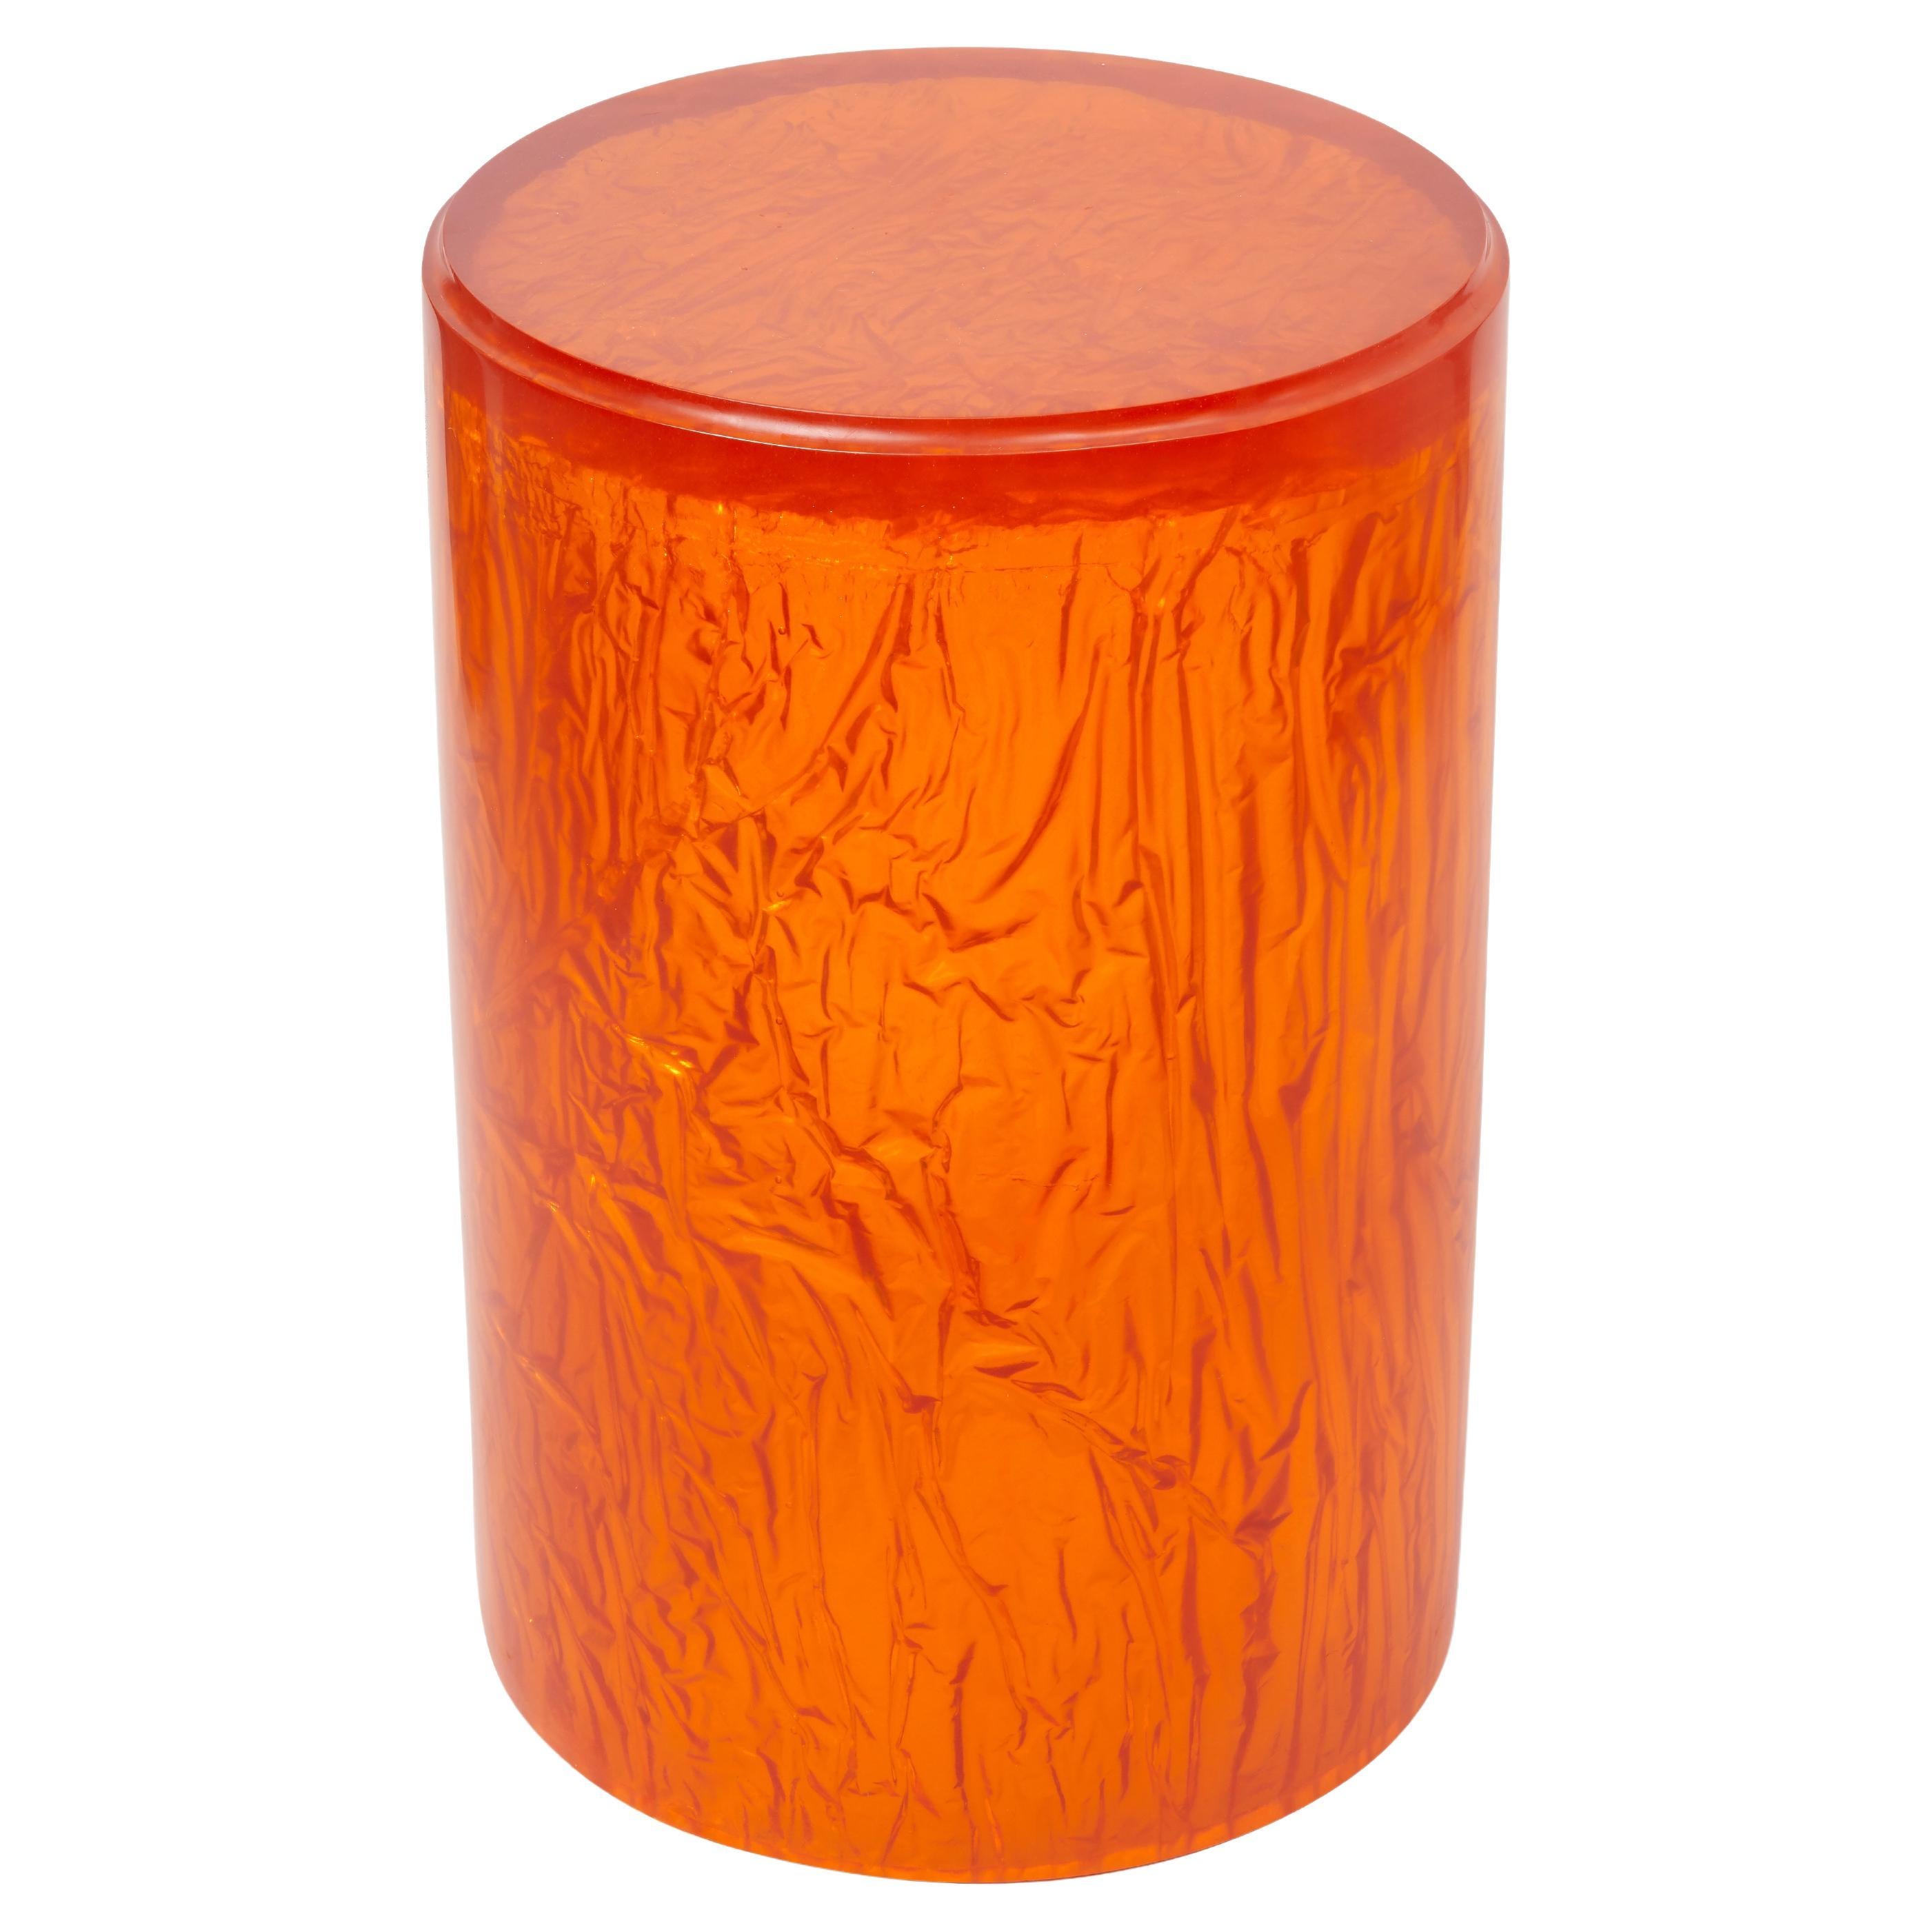 Contemporary Resin Acrylic Side Table or Stool by Natalie Tredgett, Gloss Orange For Sale